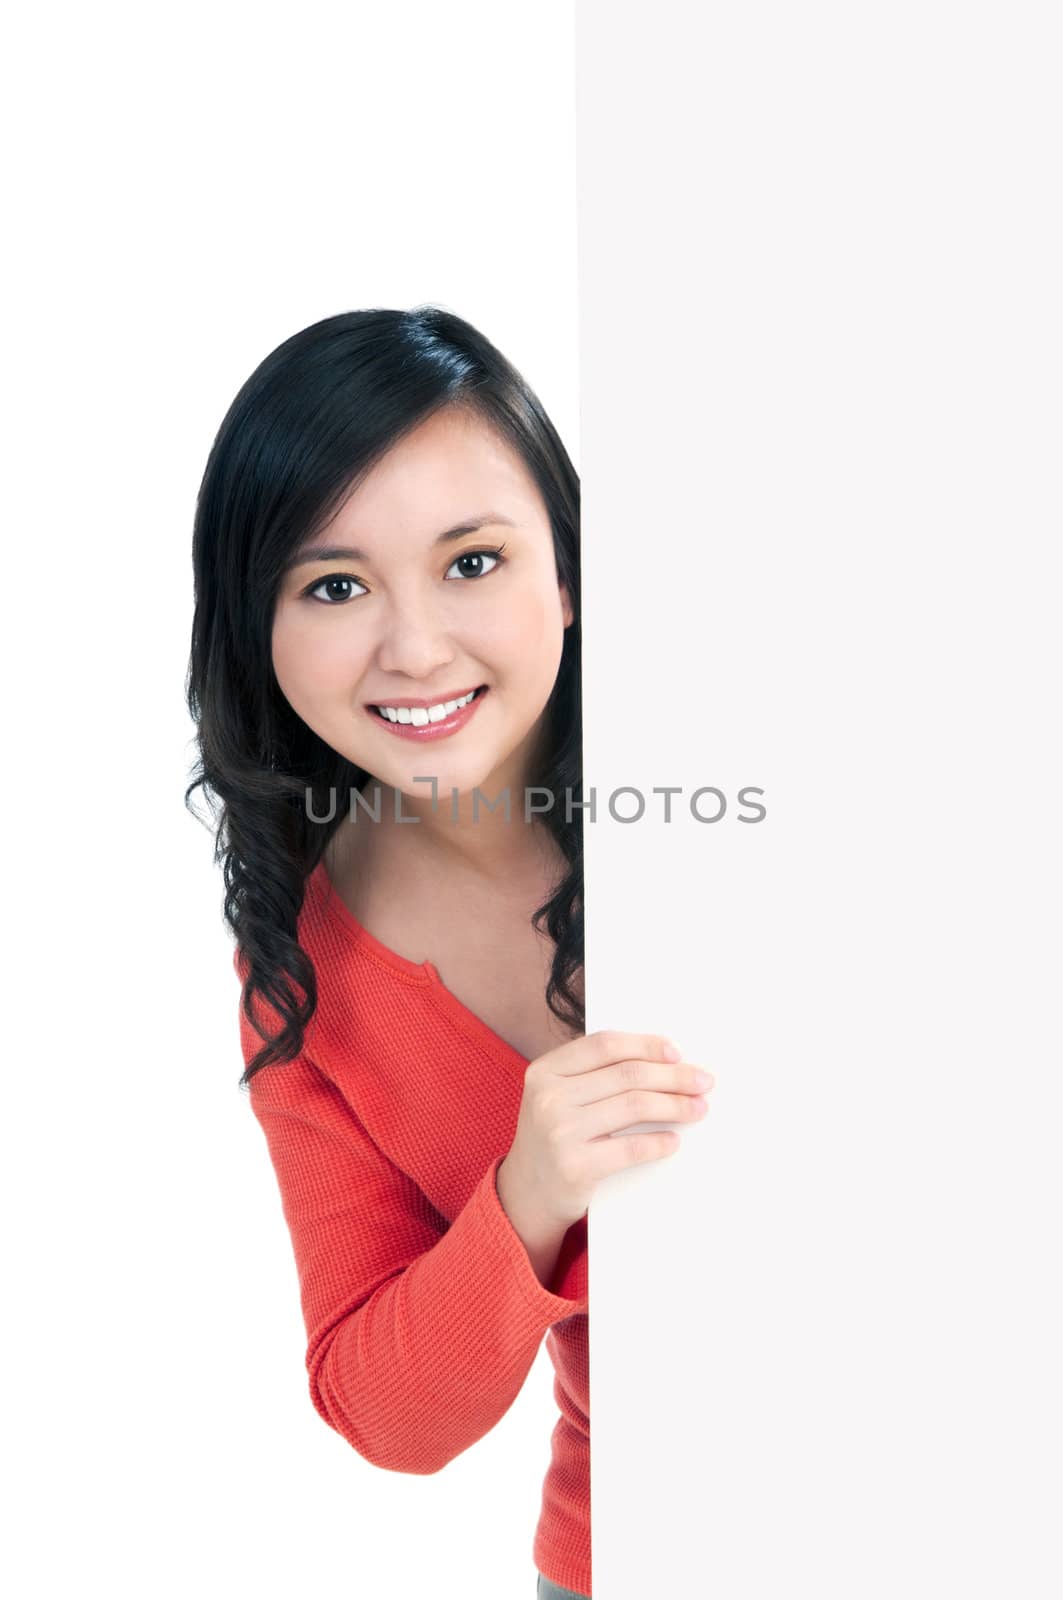 Portrait of an attractive young woman holding a billboard, over white background.